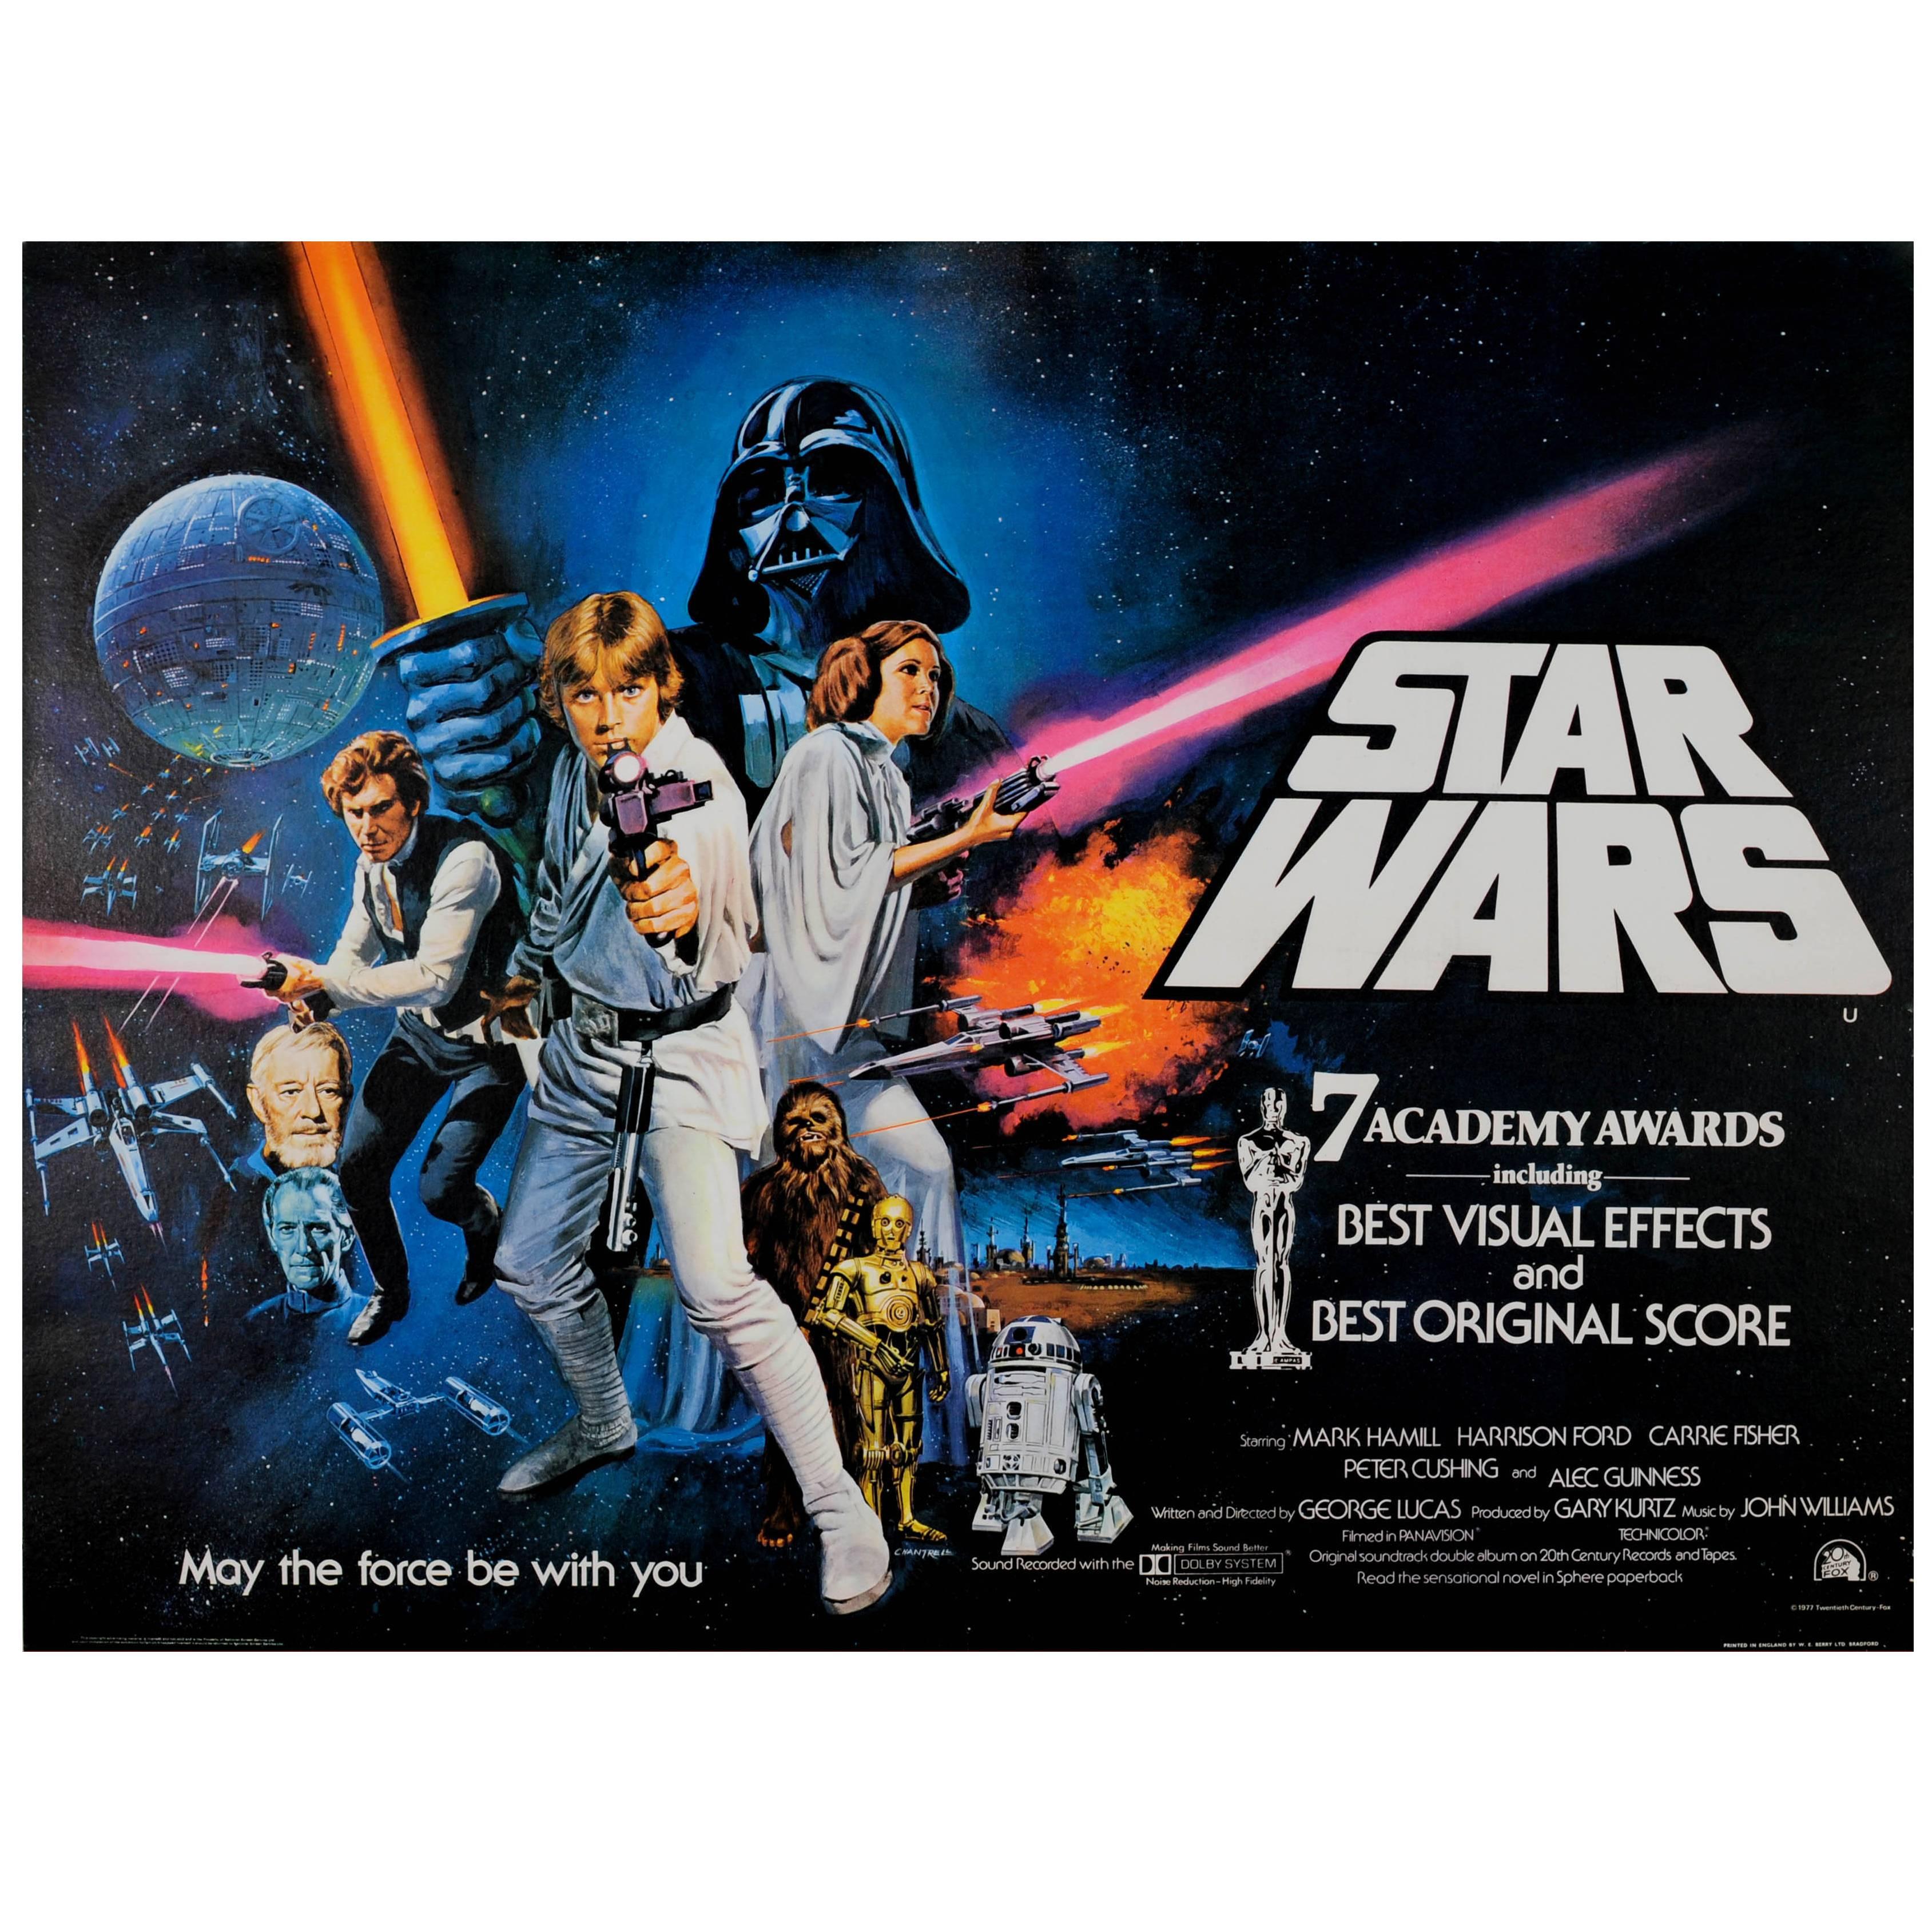 Film Classic 1977 Star Wars Movie Poster by Chantrell “7 Academy Awards”